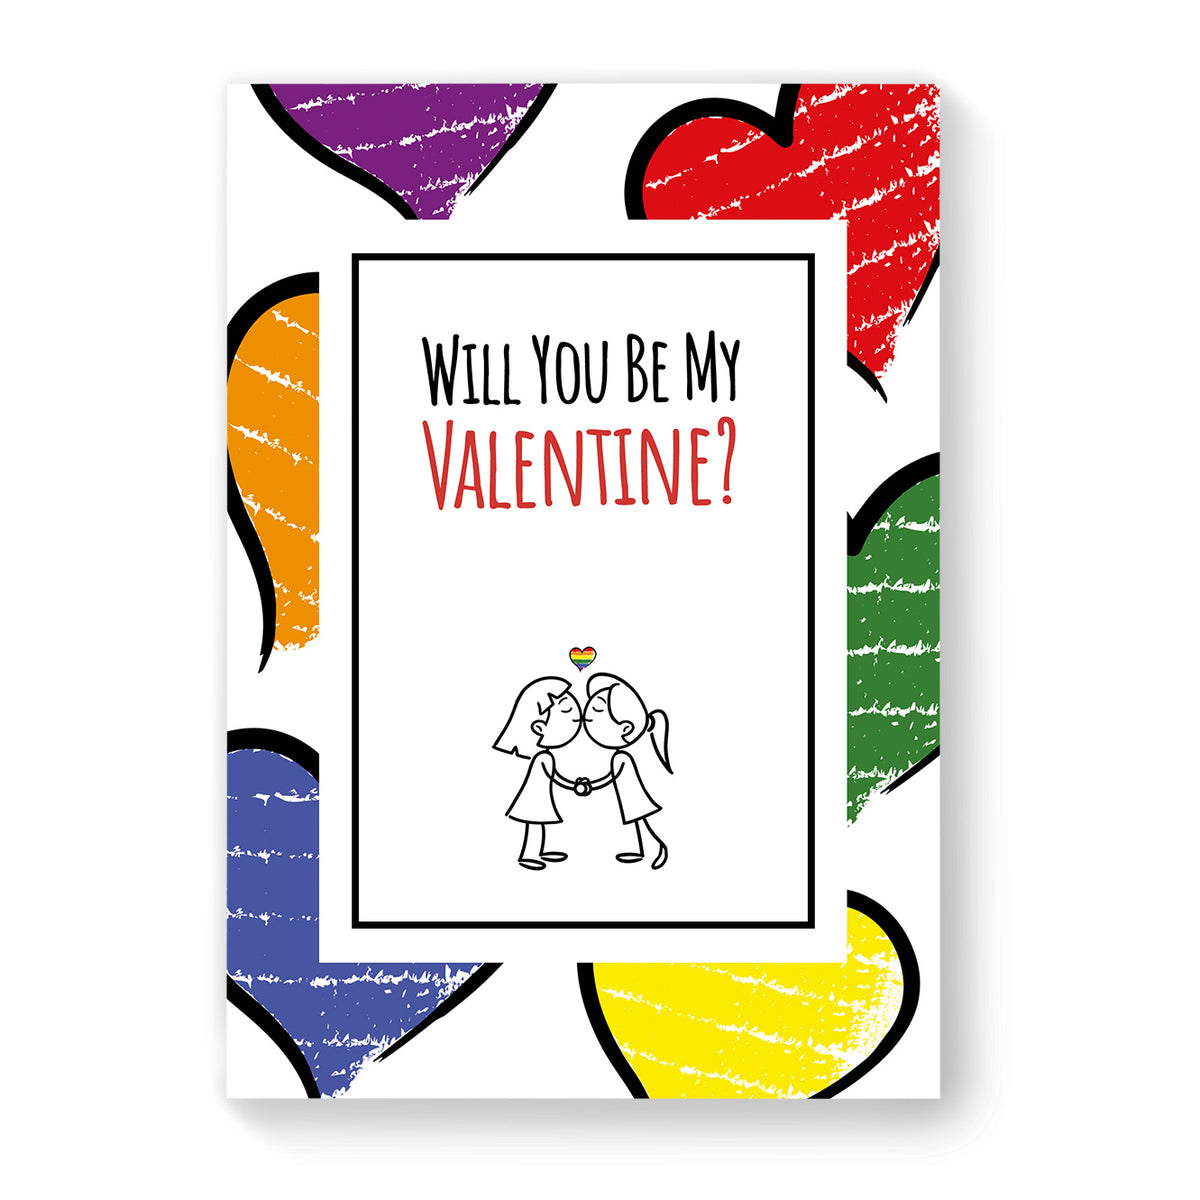 Will you be my Valentine - Lesbian Gay Couple Card - Large Heart | Gift